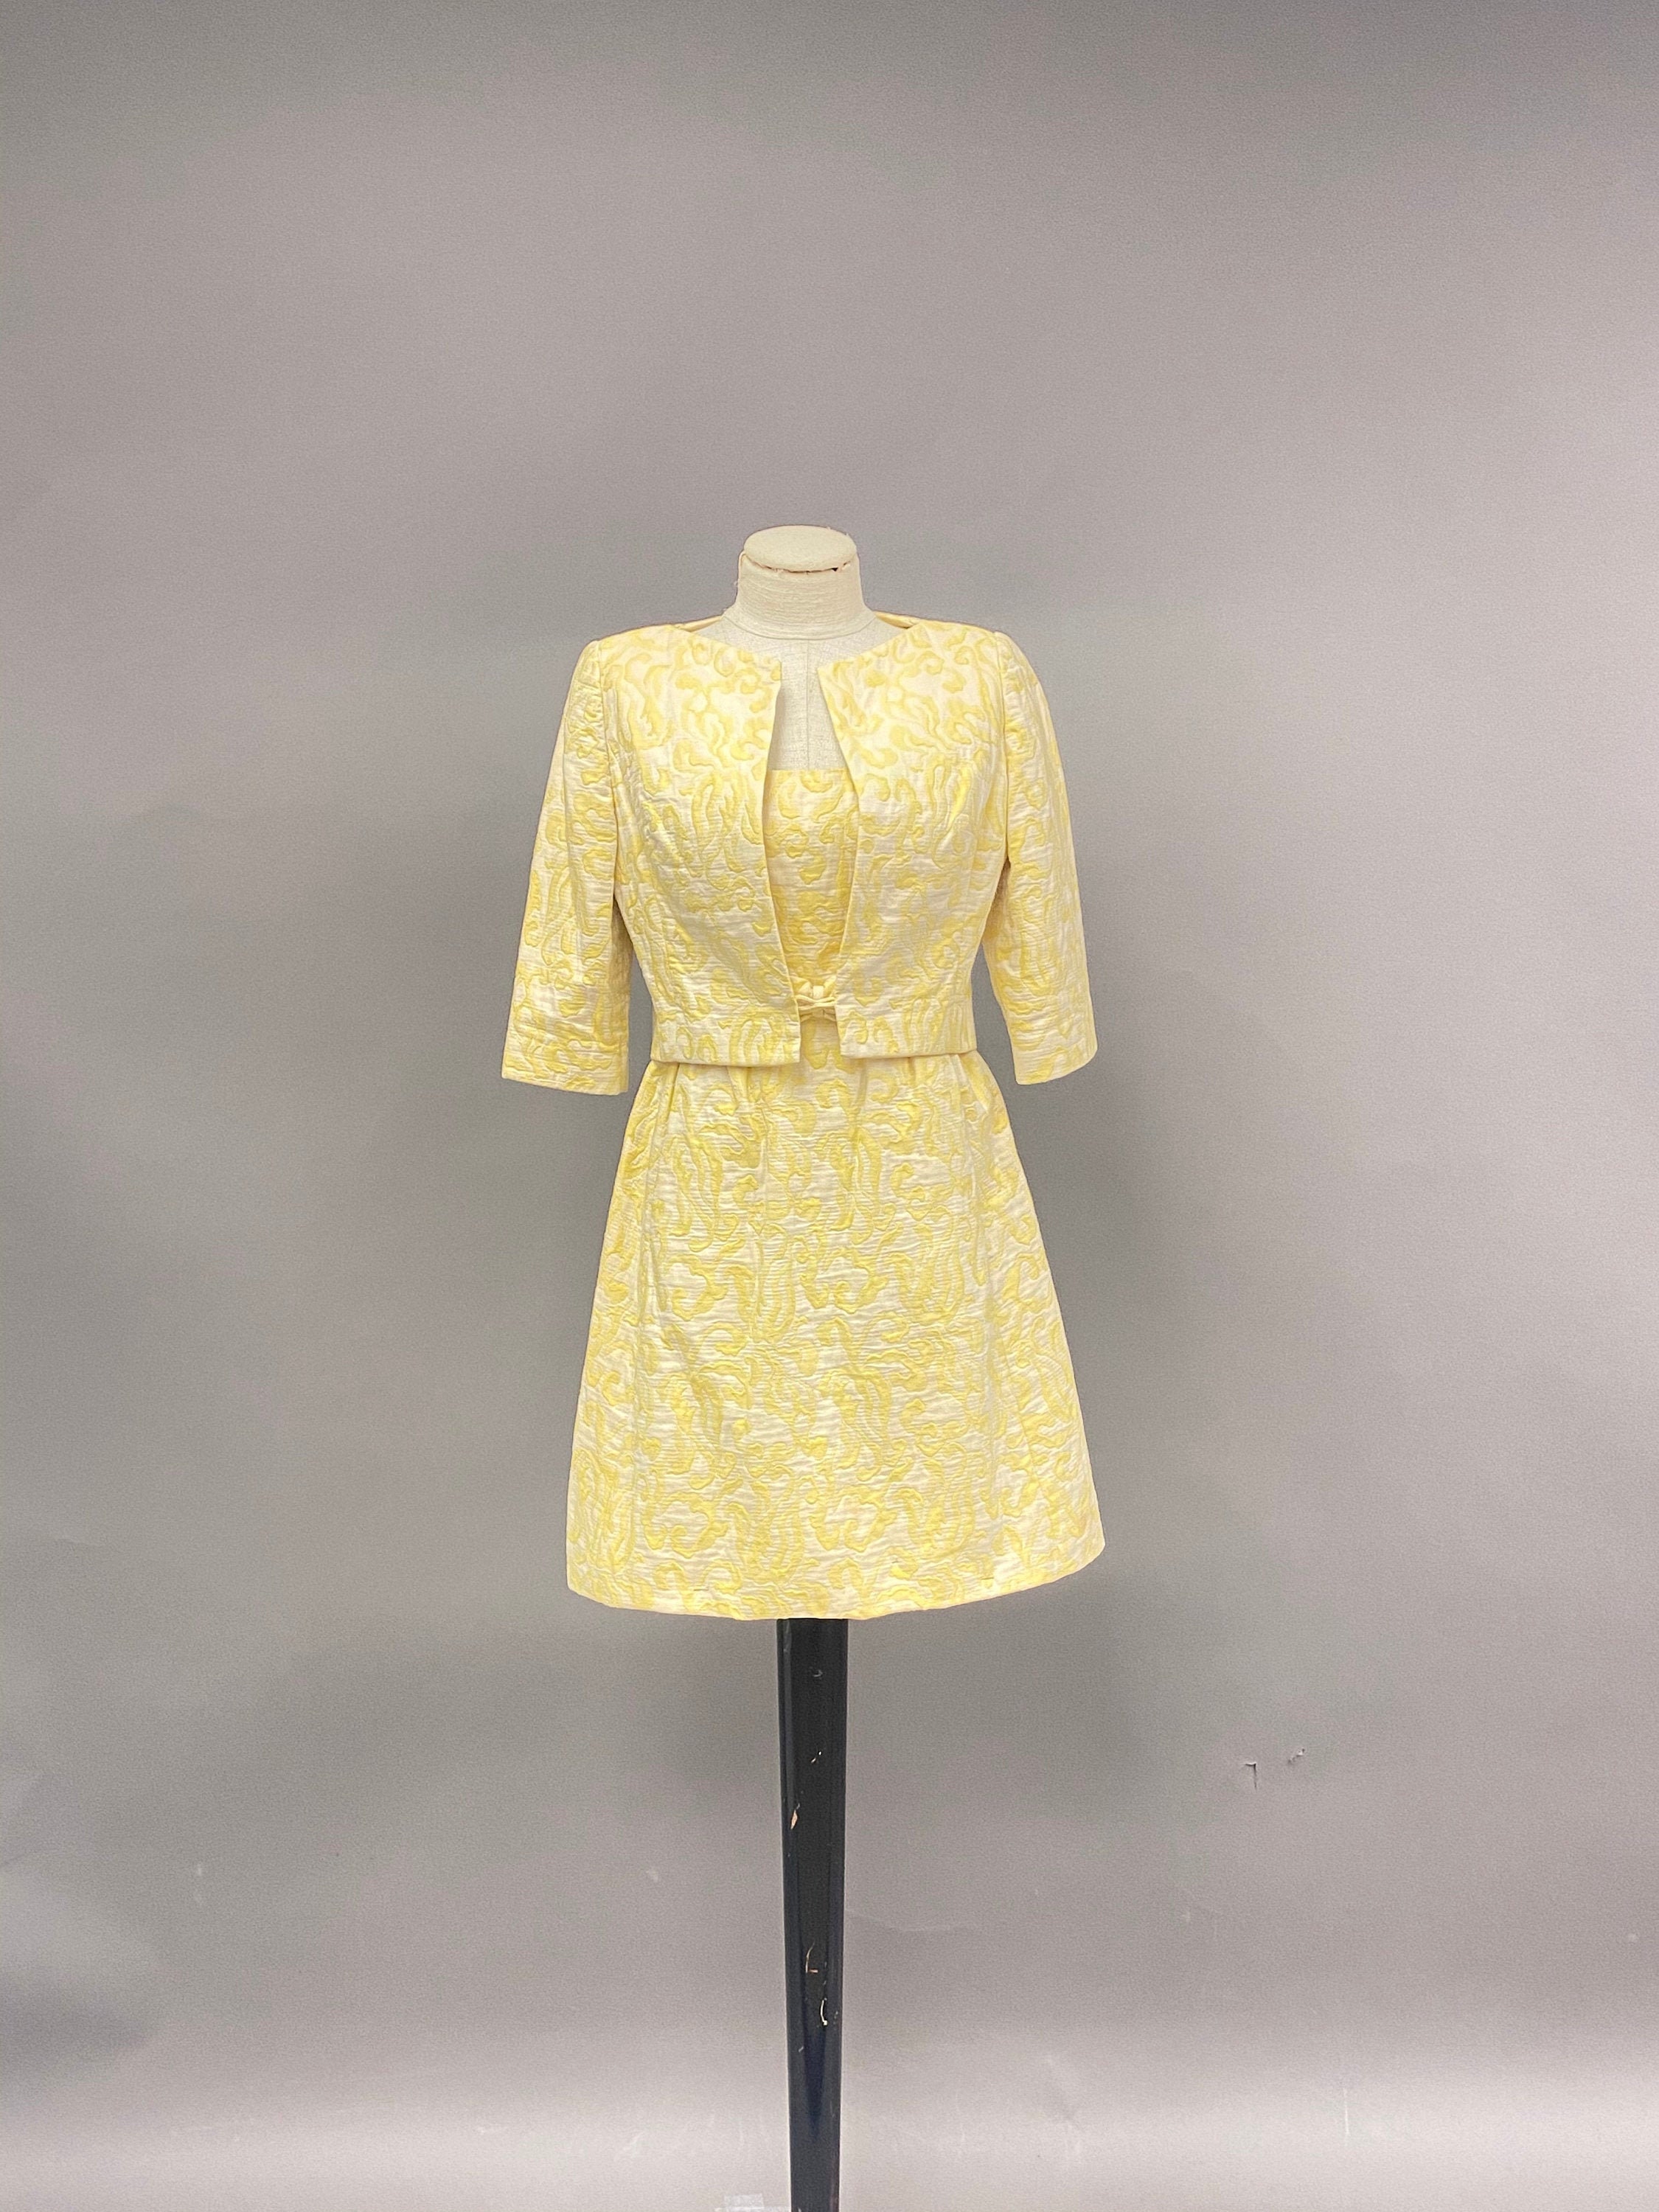 Vibrant Vintage 1930s / 1940s Yellow Lace Evening Dress With Jacket - Etsy